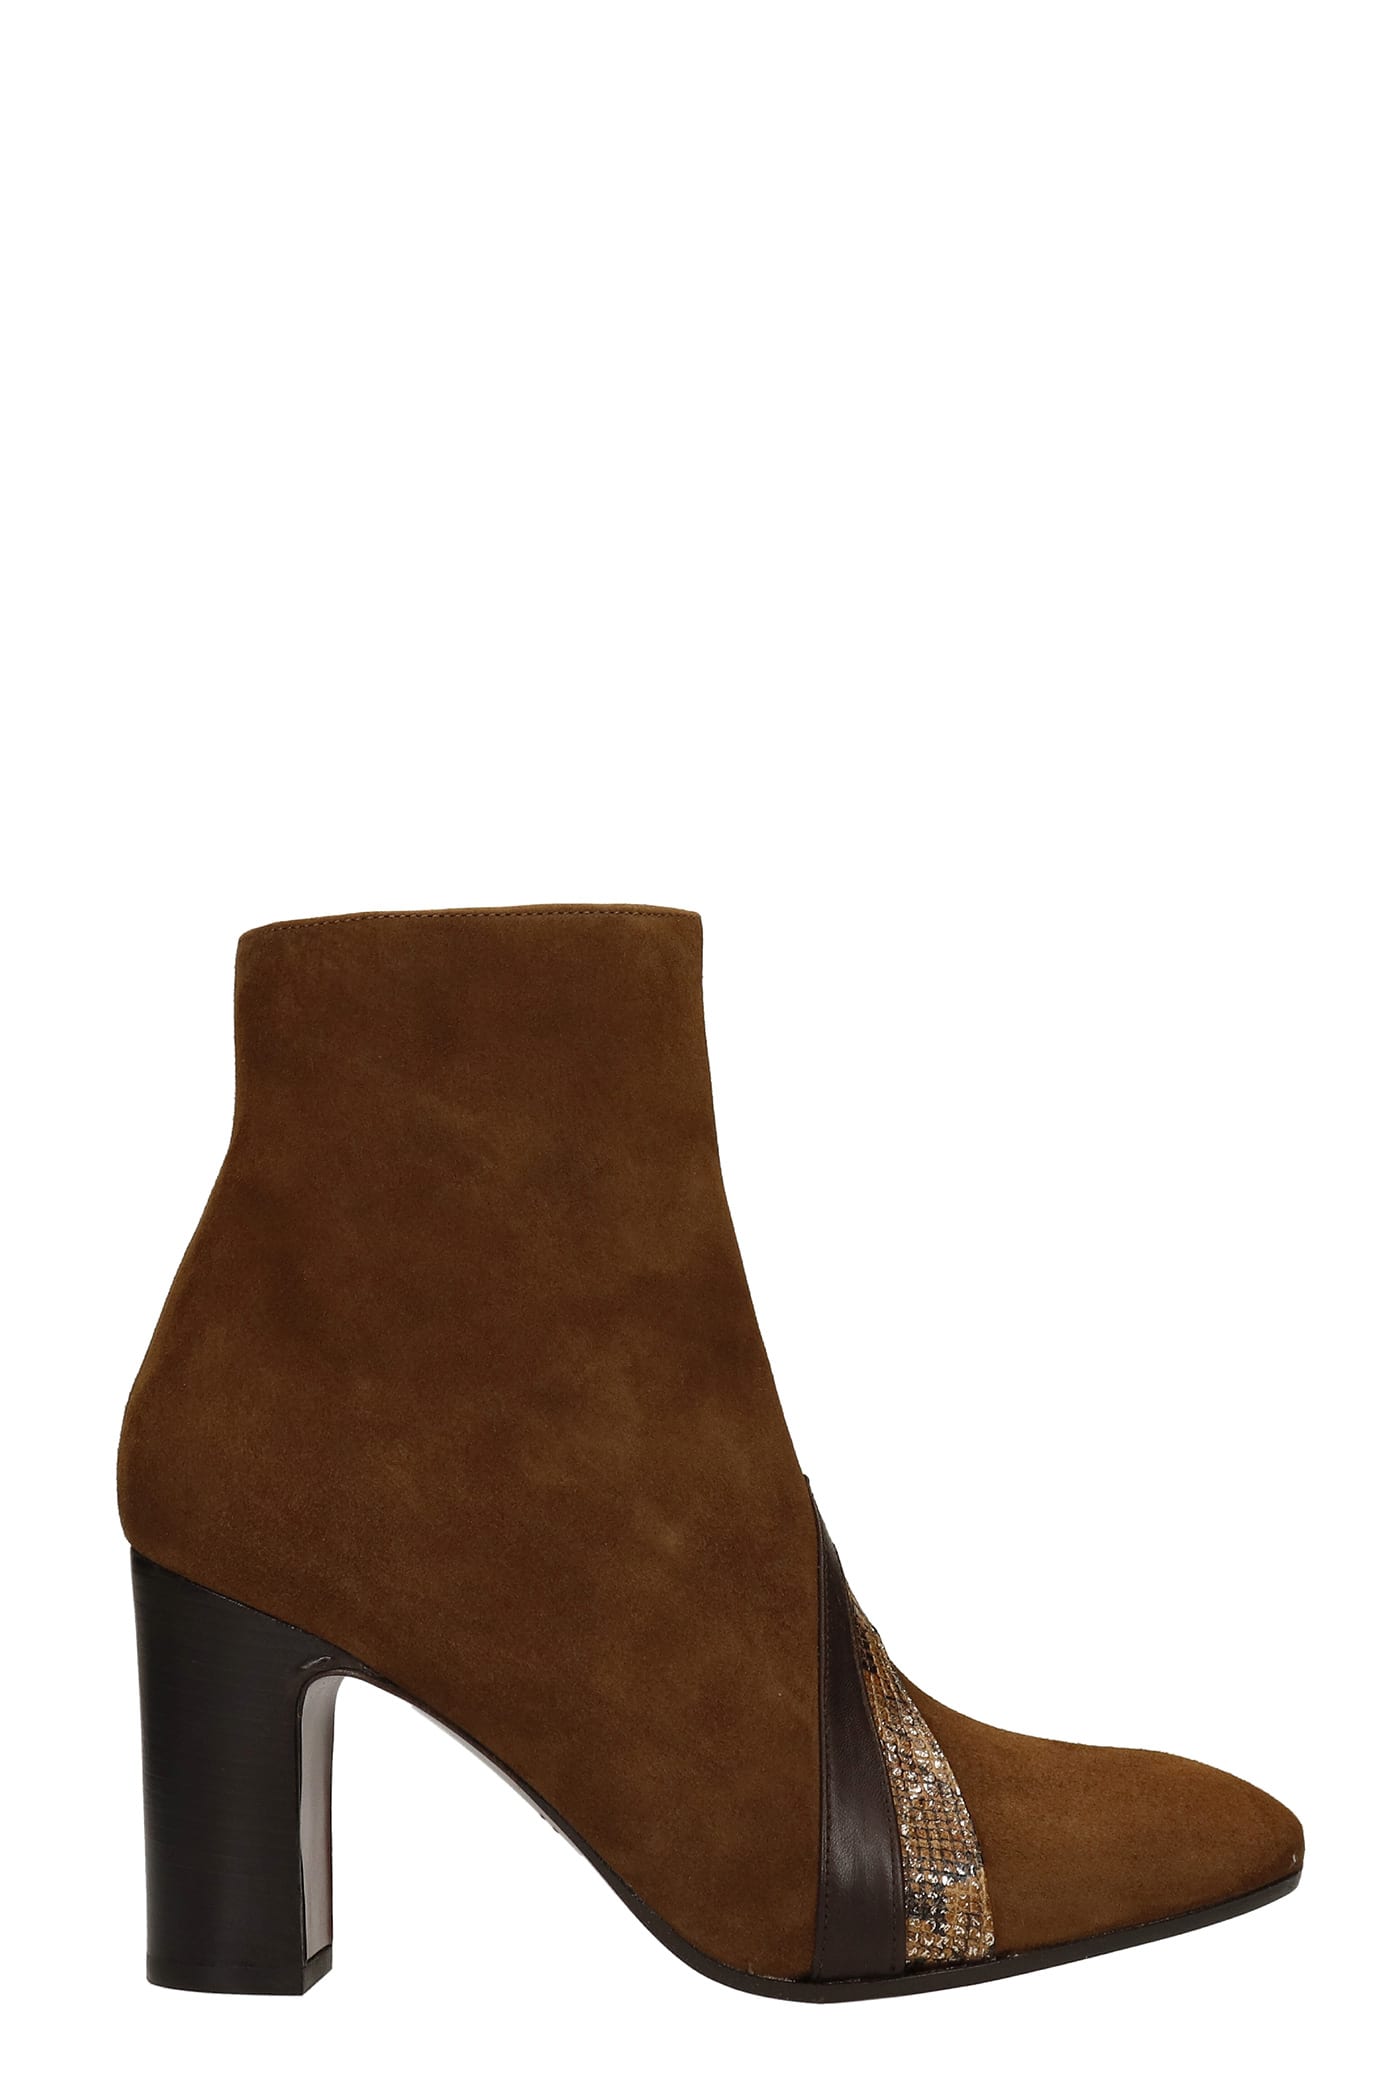 Chie Mihara Eliya High Heels Ankle Boots In Leather Color Suede